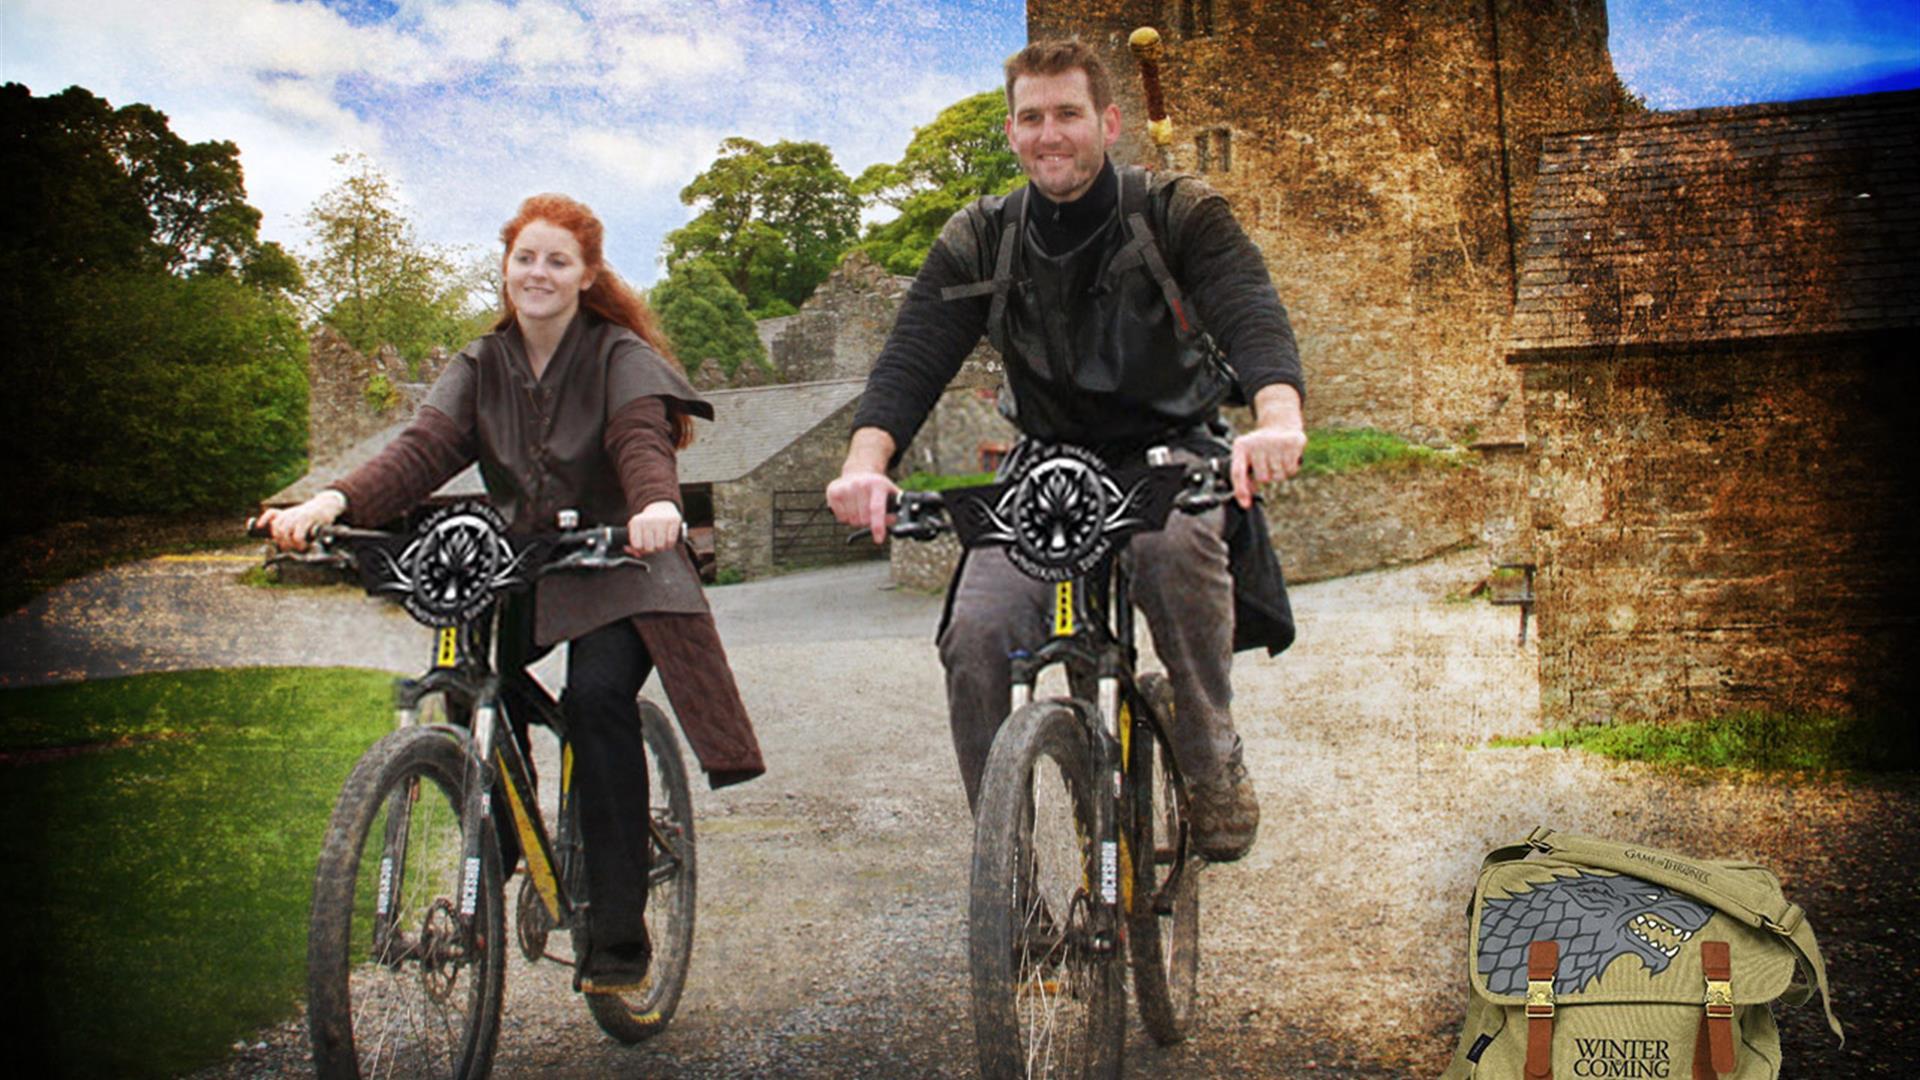 Game of Thrones® Tour – Filming Locations Cycle Tours at Winterfell Castle